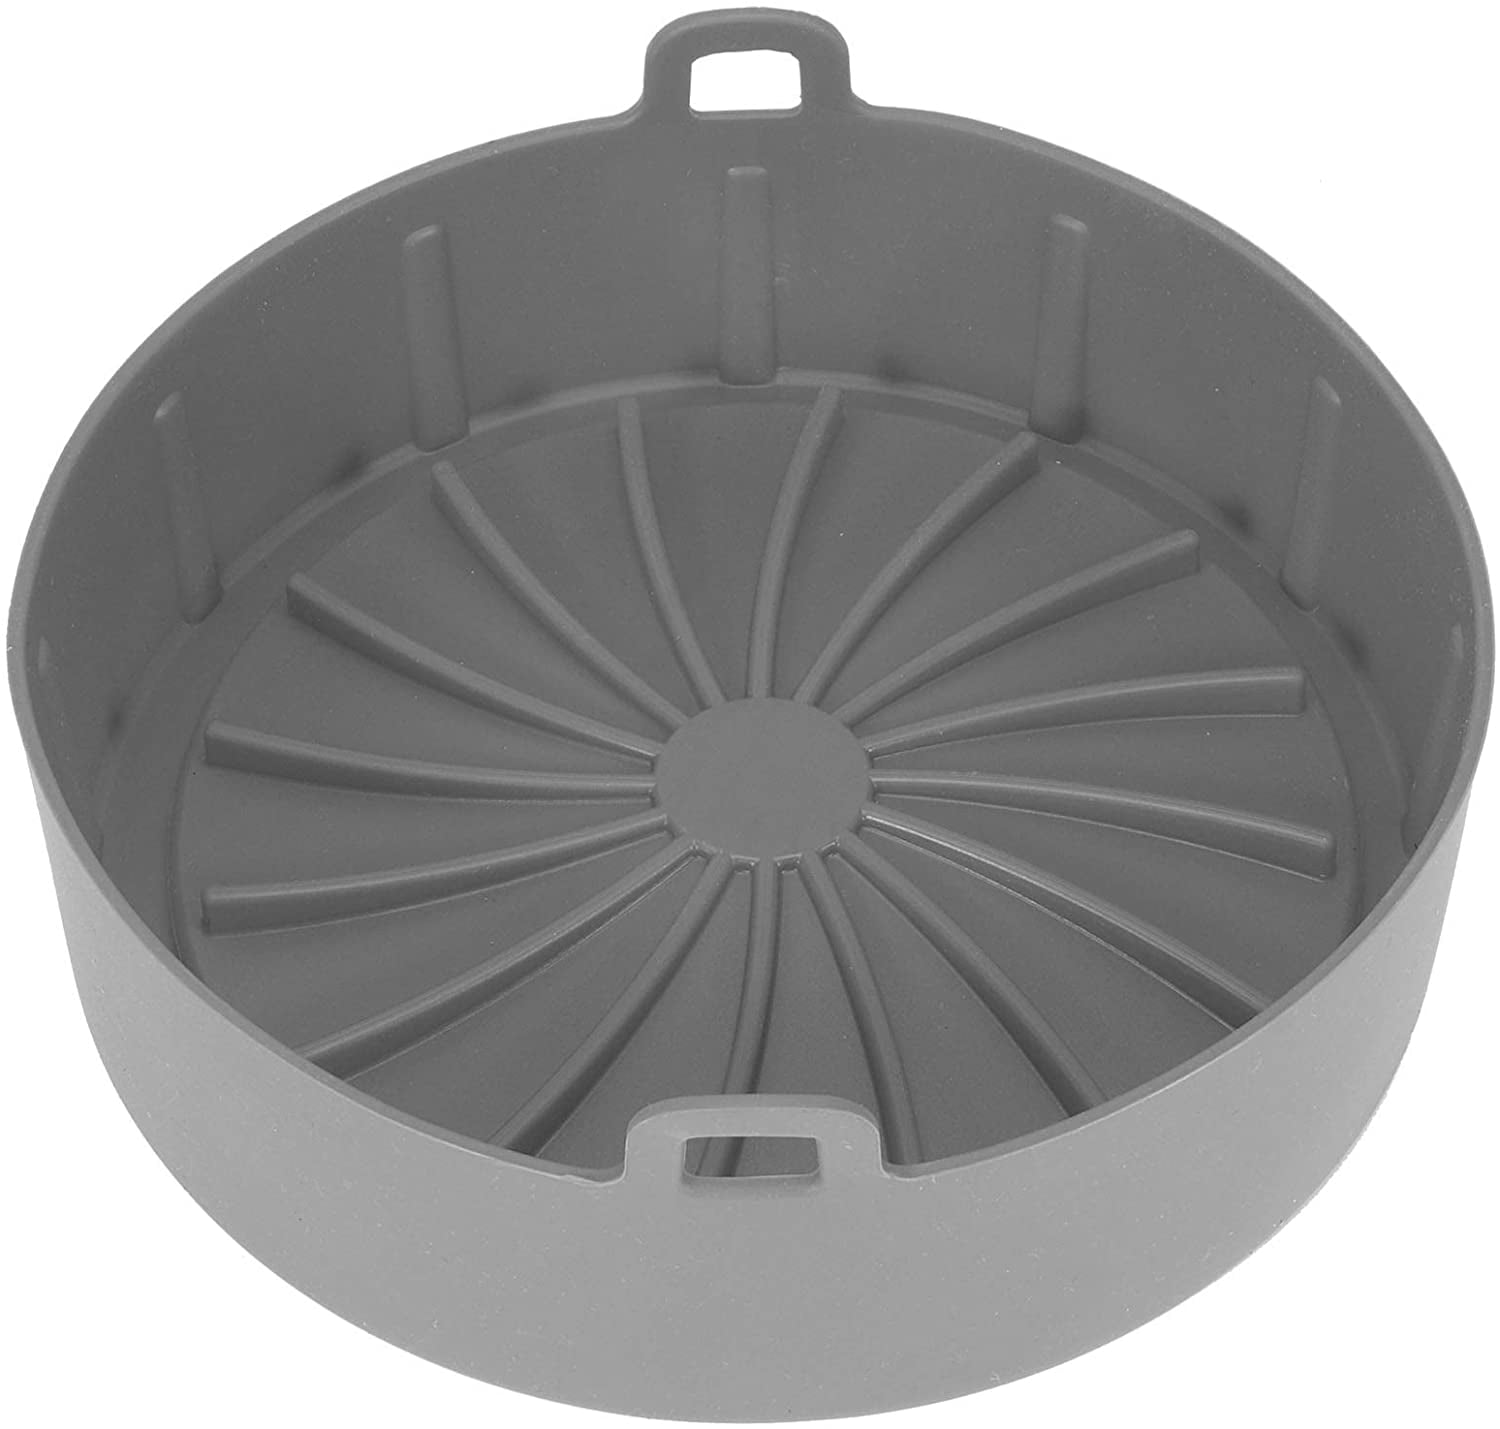 Air Frying Pot Liner Silicone Grill Pan Bread Cake Mat Basket Frying Accessories 